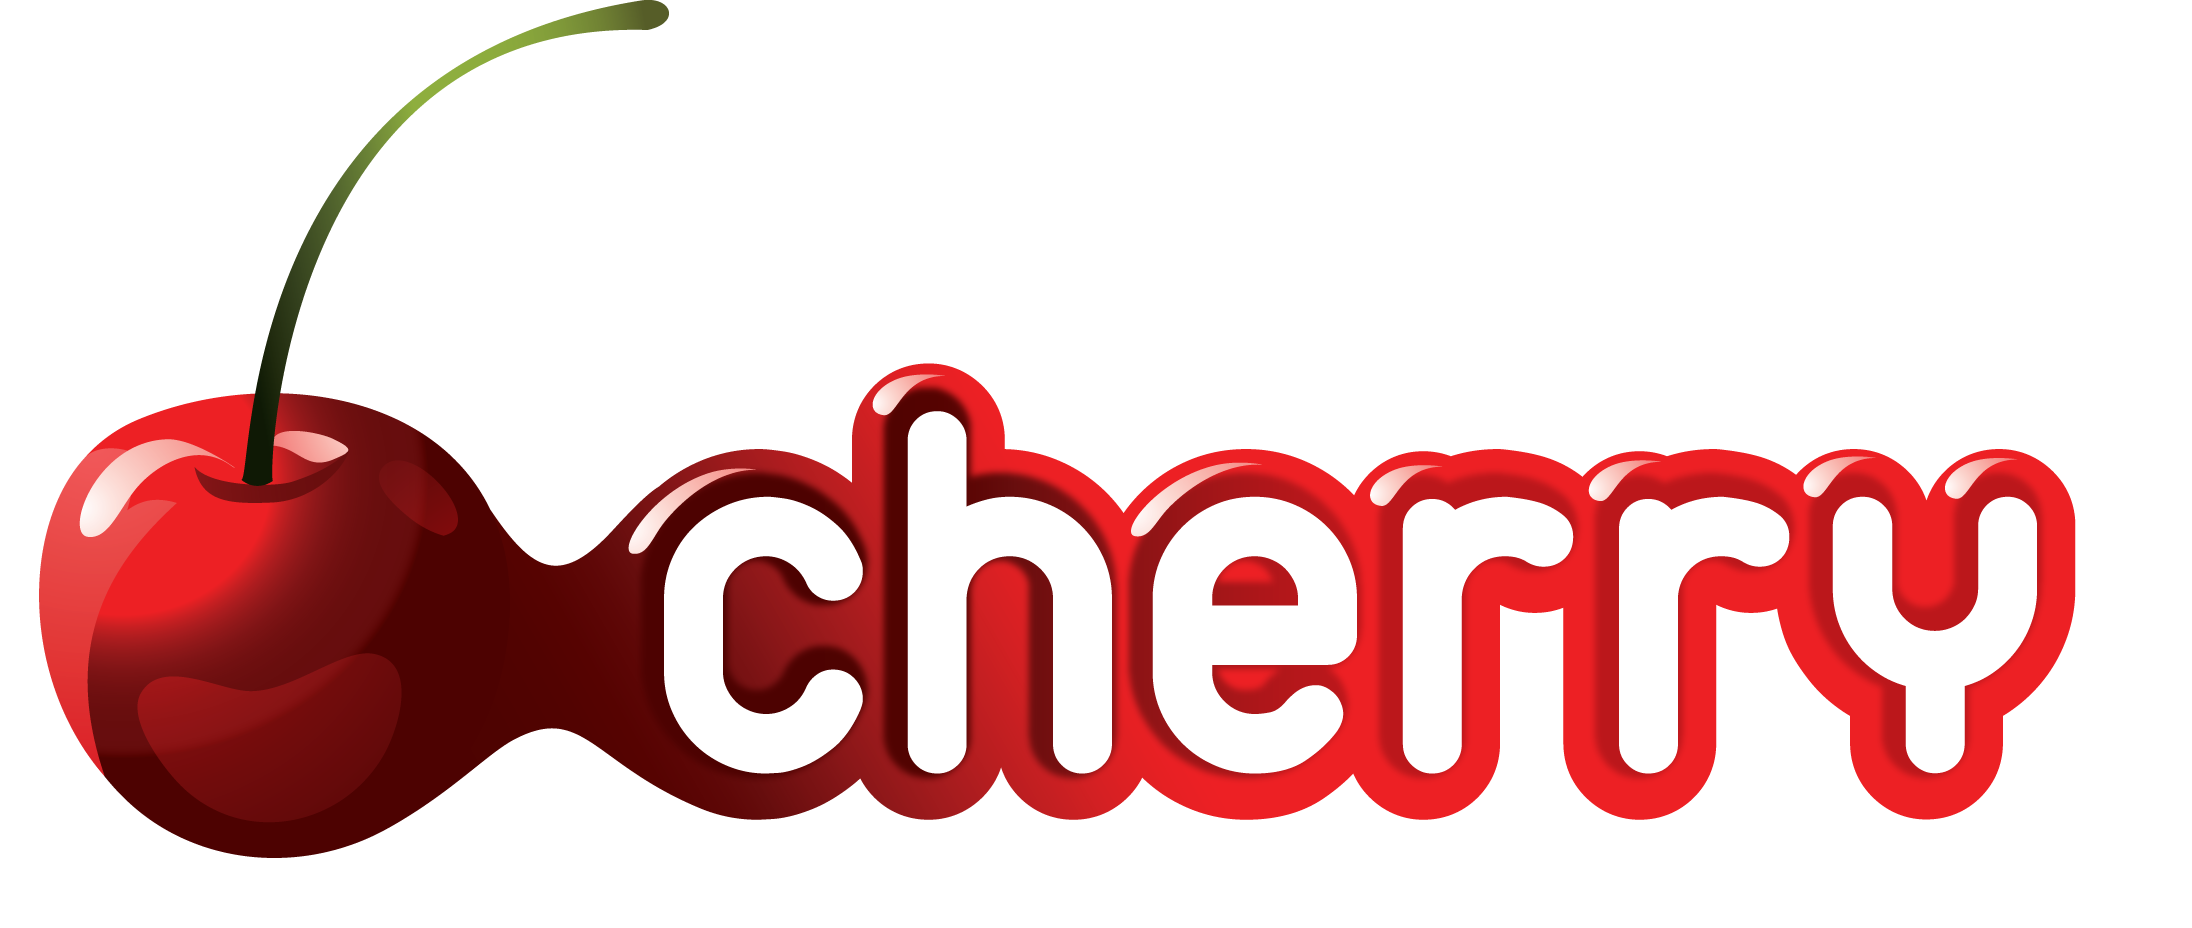 0 Result Images of Cherry Logo Brand Name - PNG Image Collection - EroFound